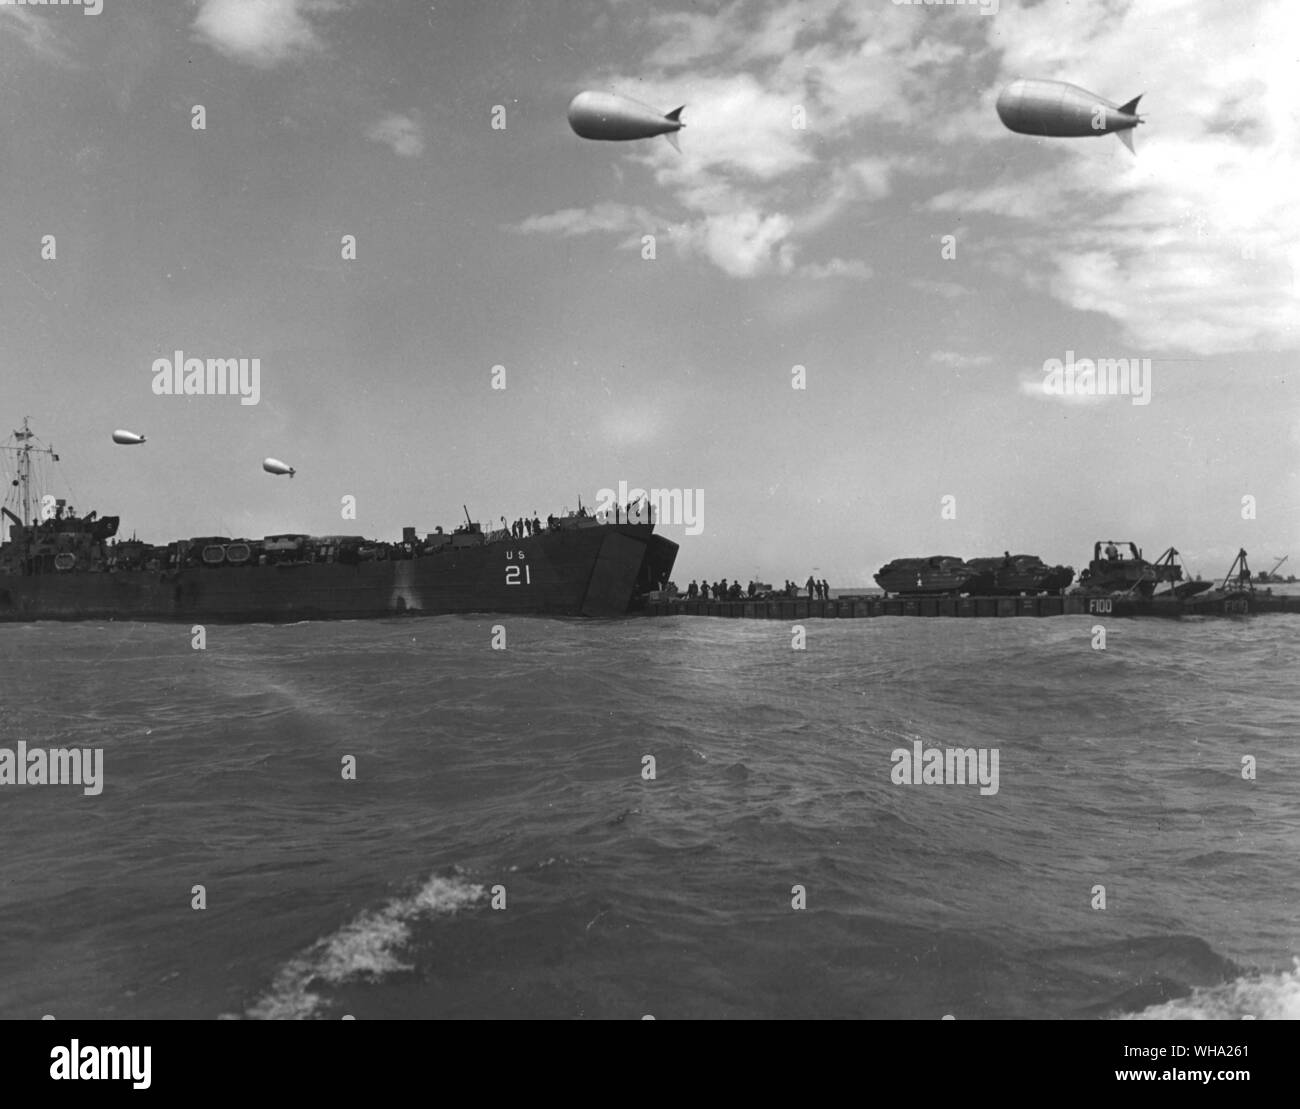 WW2: Protected from straffing Nazi planes by barrage balloons, a coast guard tank landing ship (left) forward passes a load of mechanised fighting vehicles to flat top of a rhino in the English in the English Channel during the height of the invasion of the French coast. The Rhinos slogged through the surf to unload their cargoes on the beach. Stock Photo